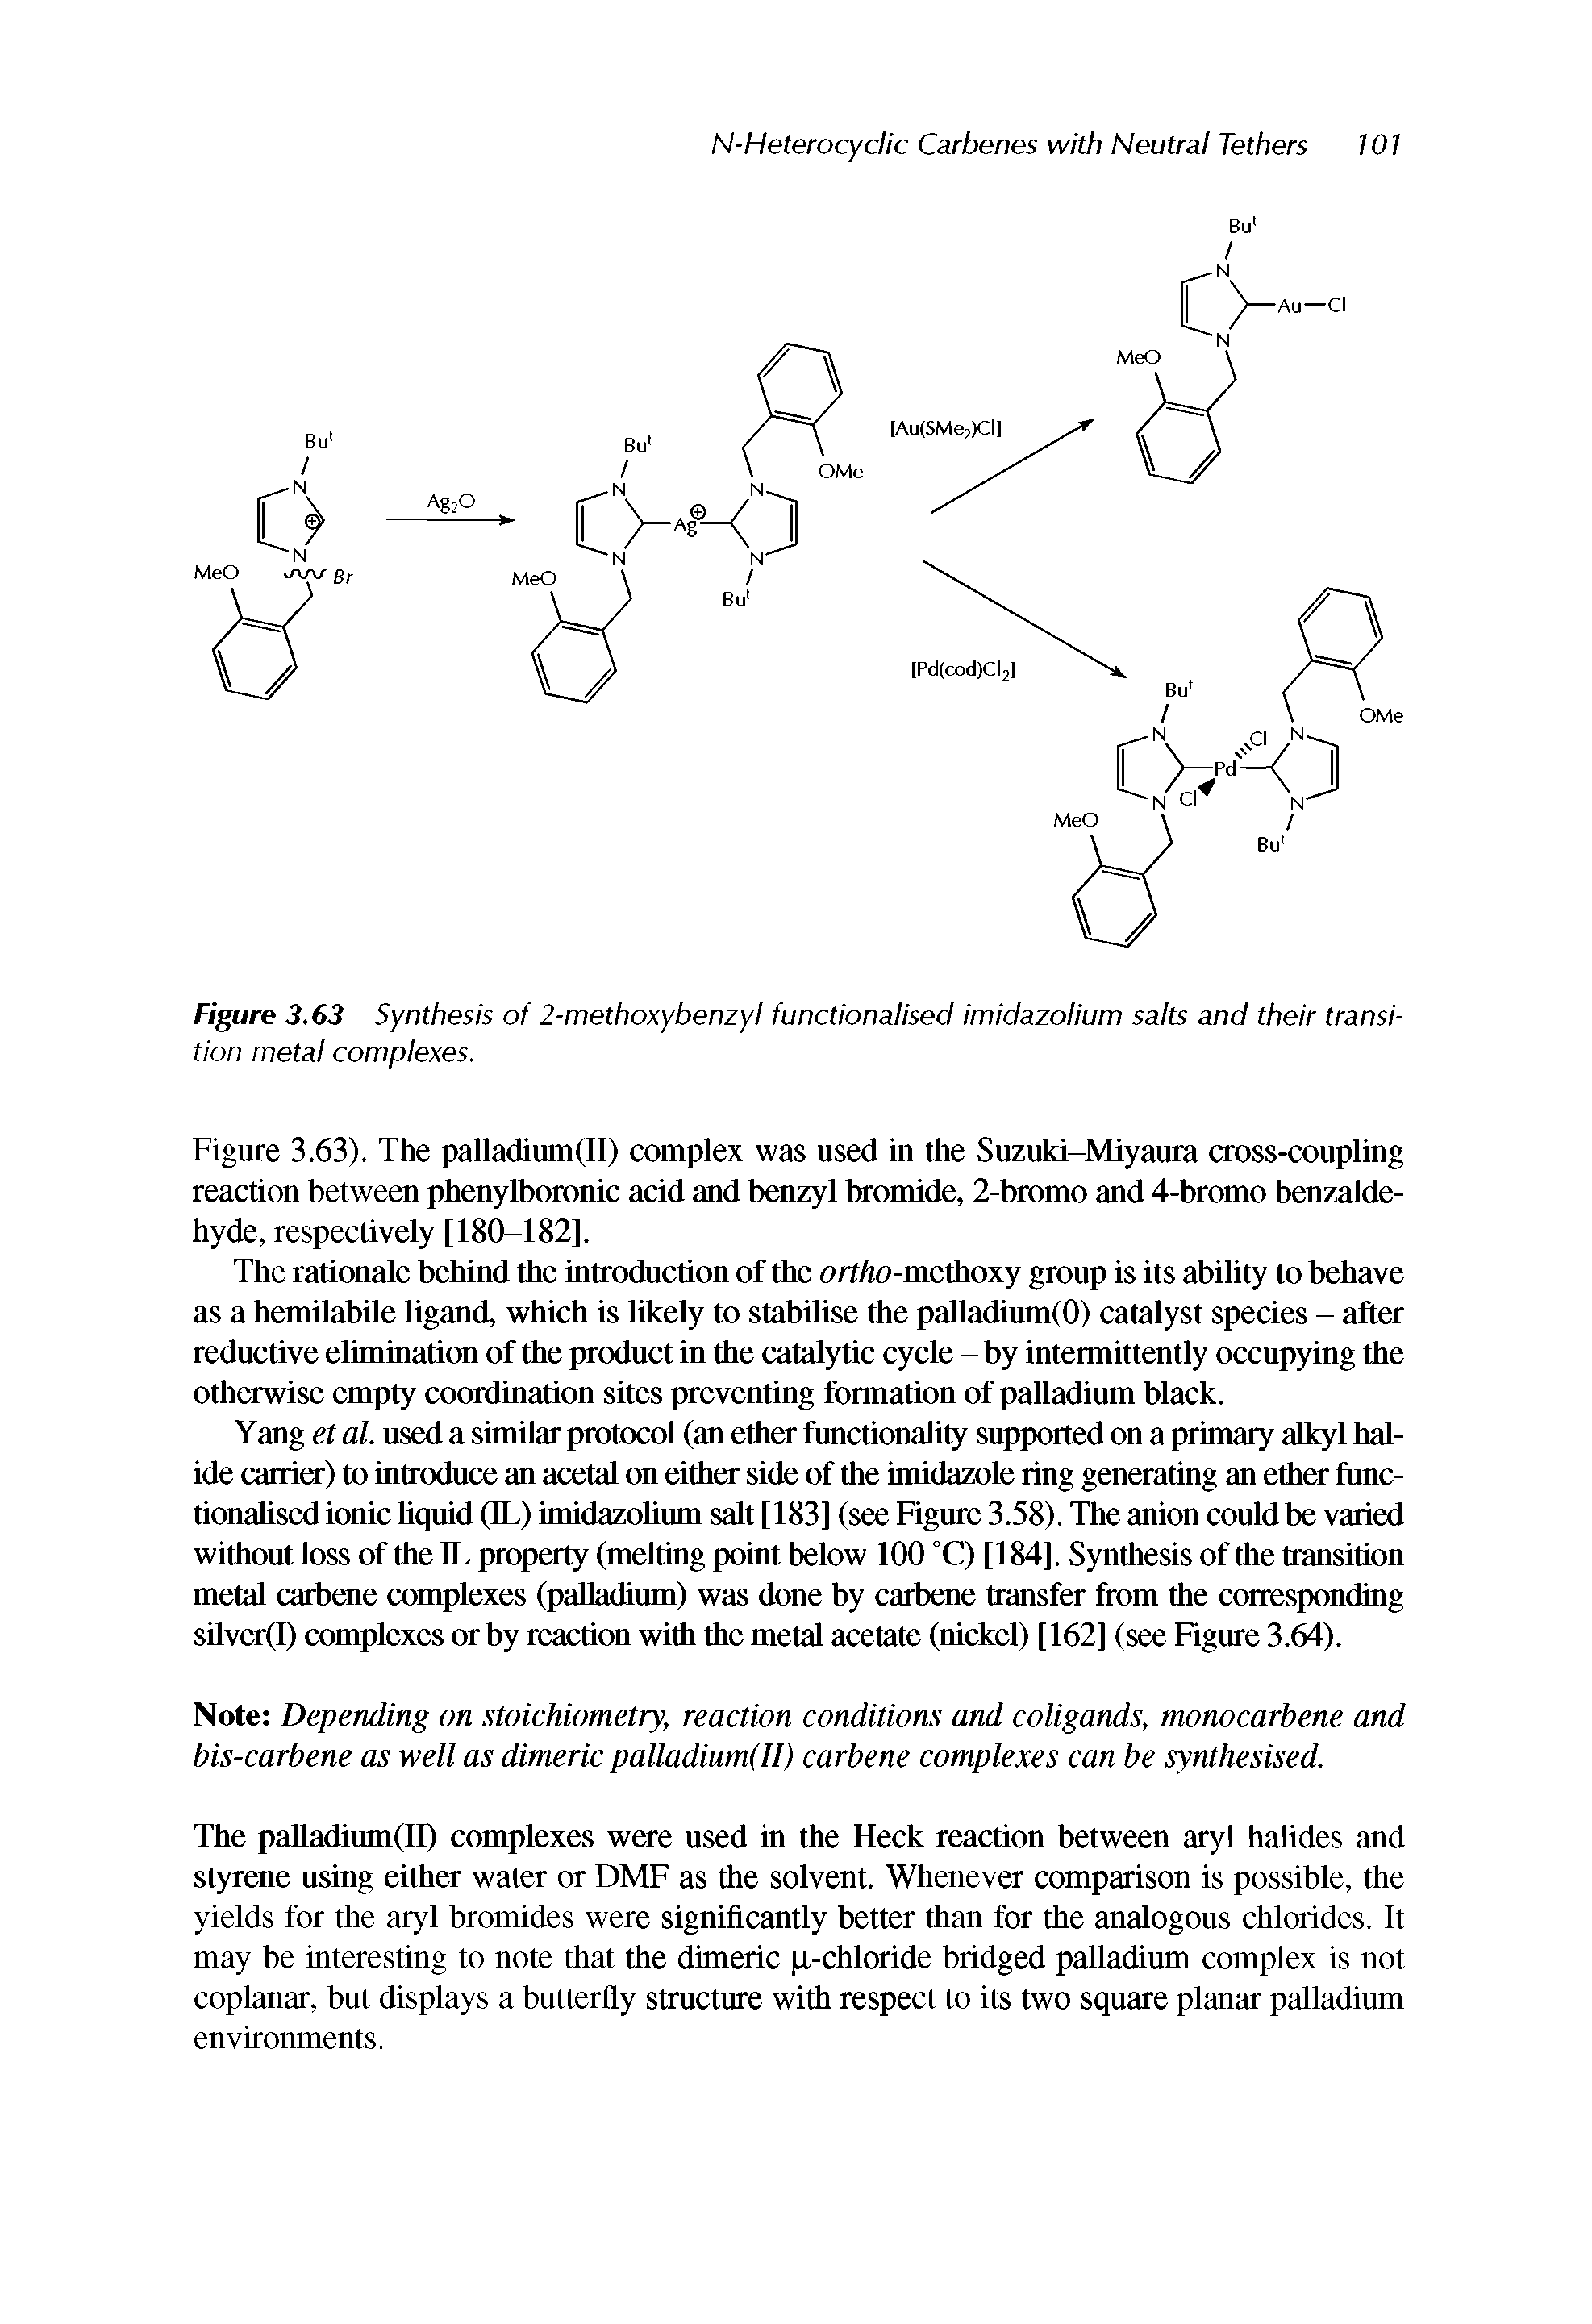 Figure 3.63). The palladium(II) complex was used in the Suzuki-Miyaura cross-coupling reaction between phenylboronic acid and benzyl bromide, 2-bromo and 4-bromo benzalde-hyde, respectively [180-182],...